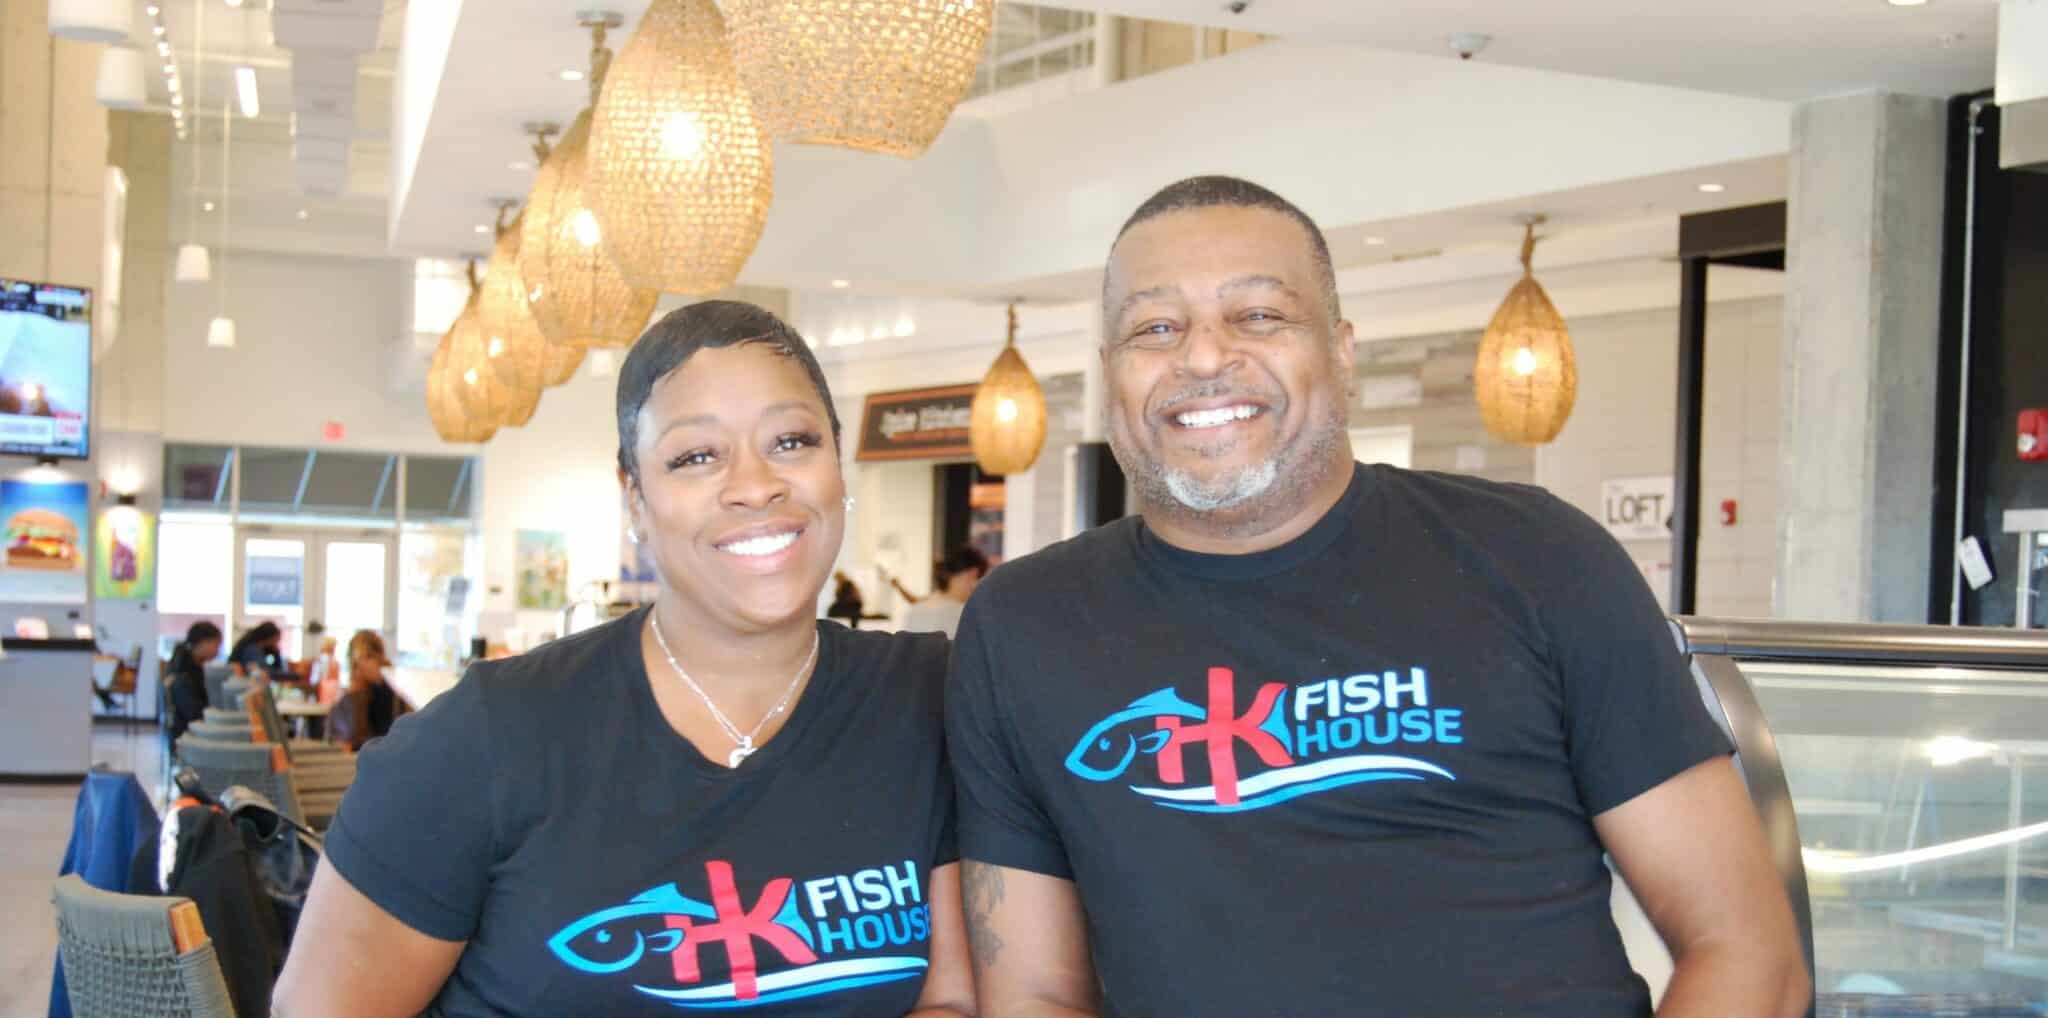 Chef Kimberly and Chef Henry, owners of HK Fish House